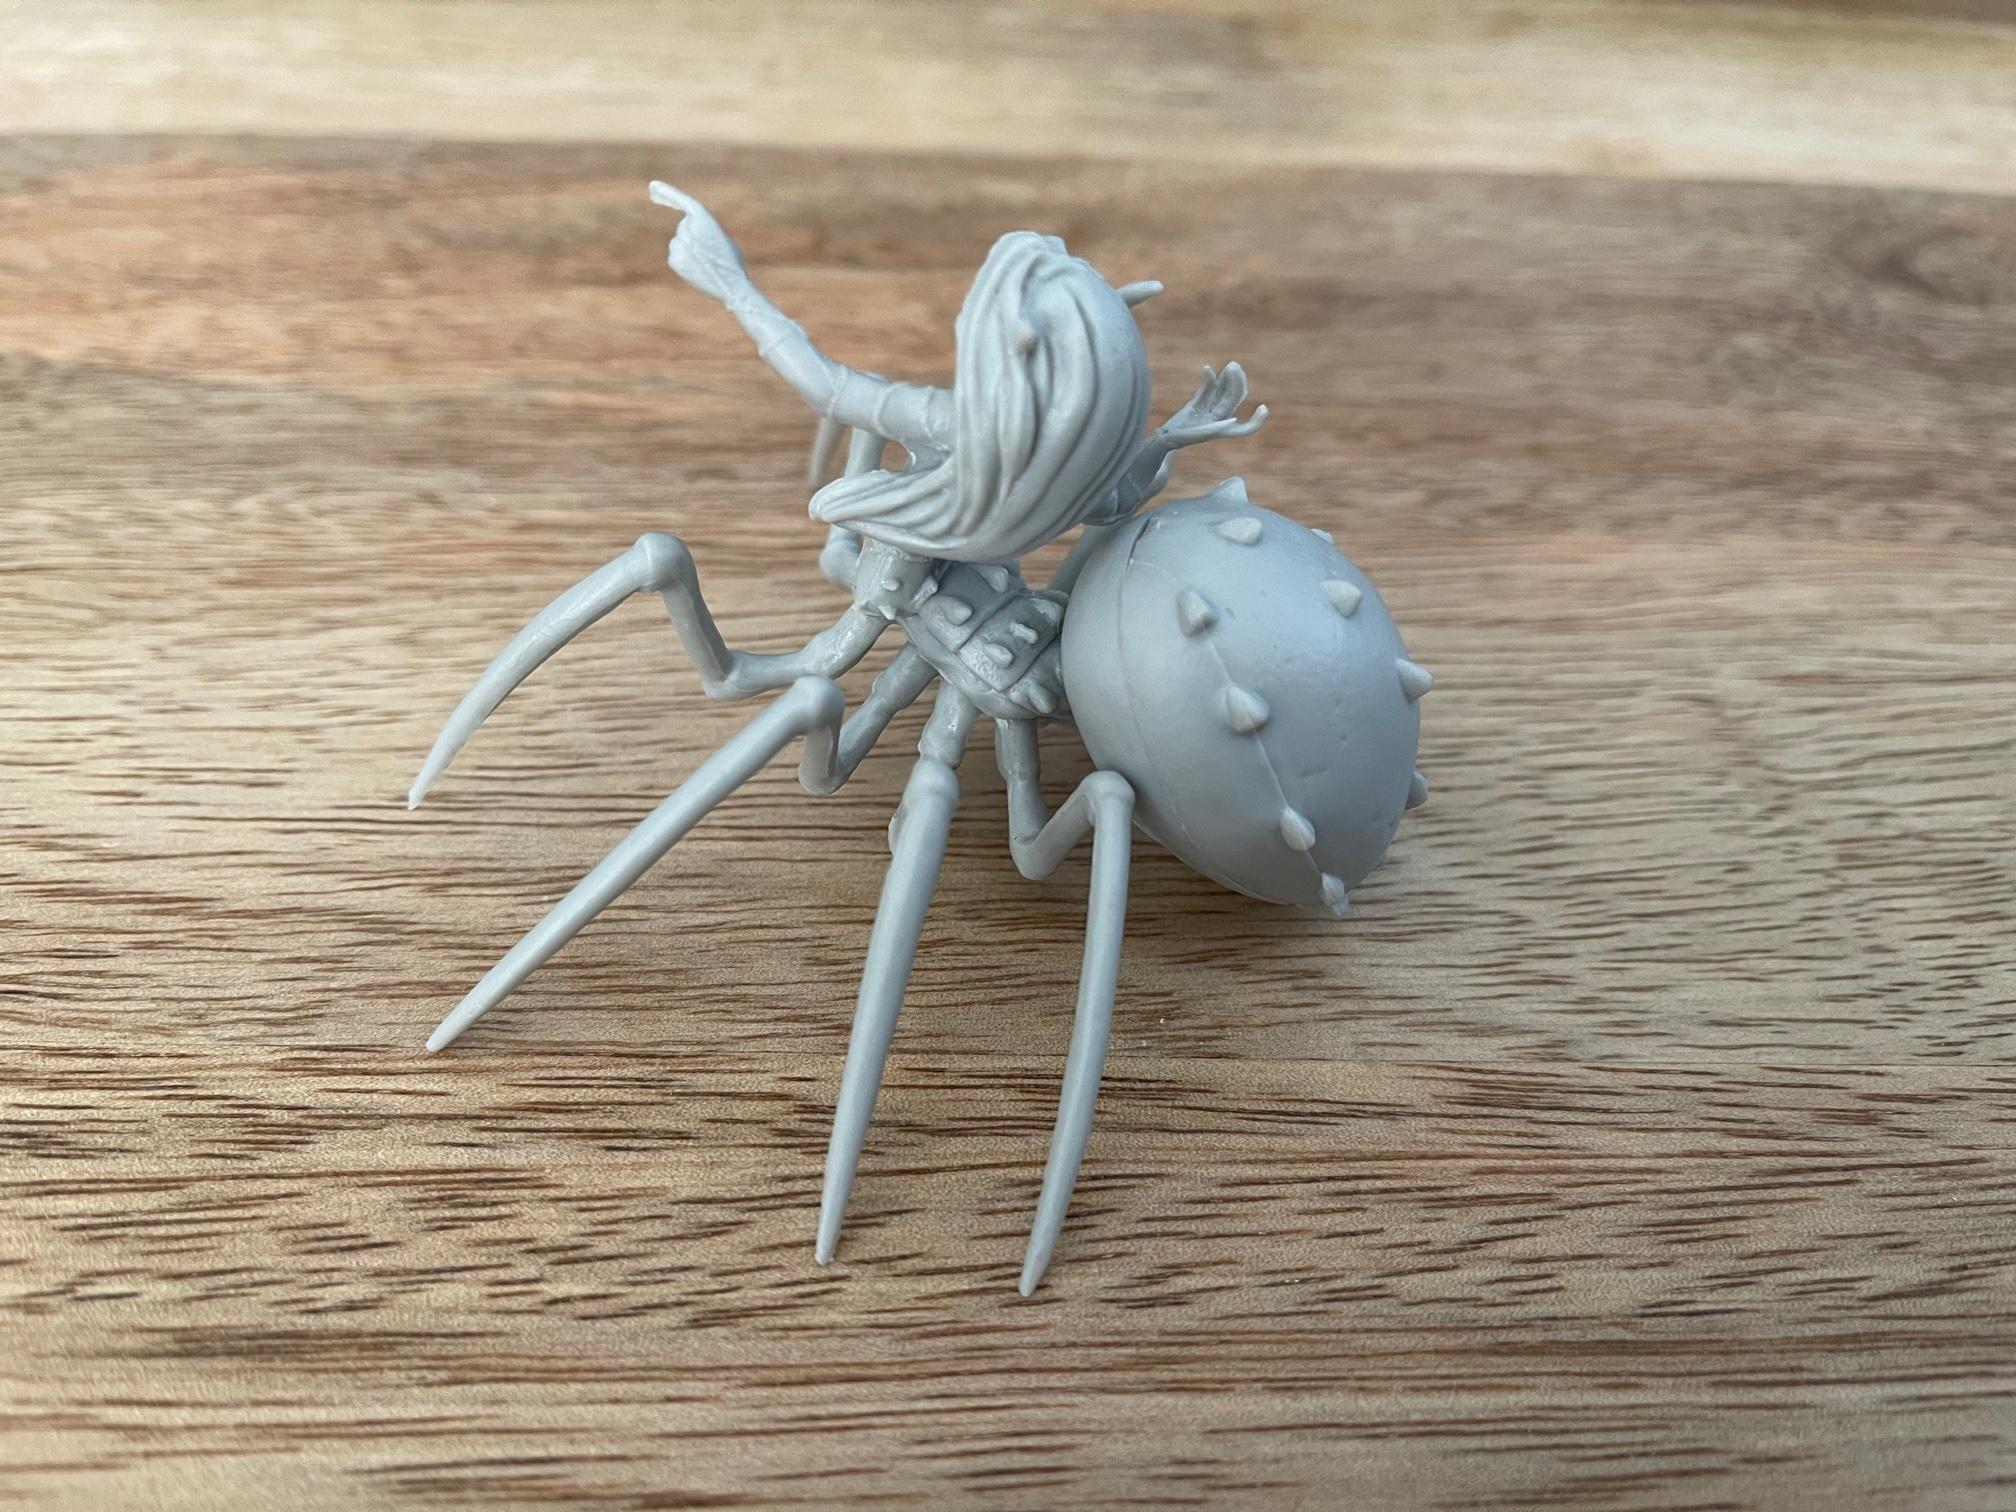 Dungeons And Dragons, Spider, Work In Progress